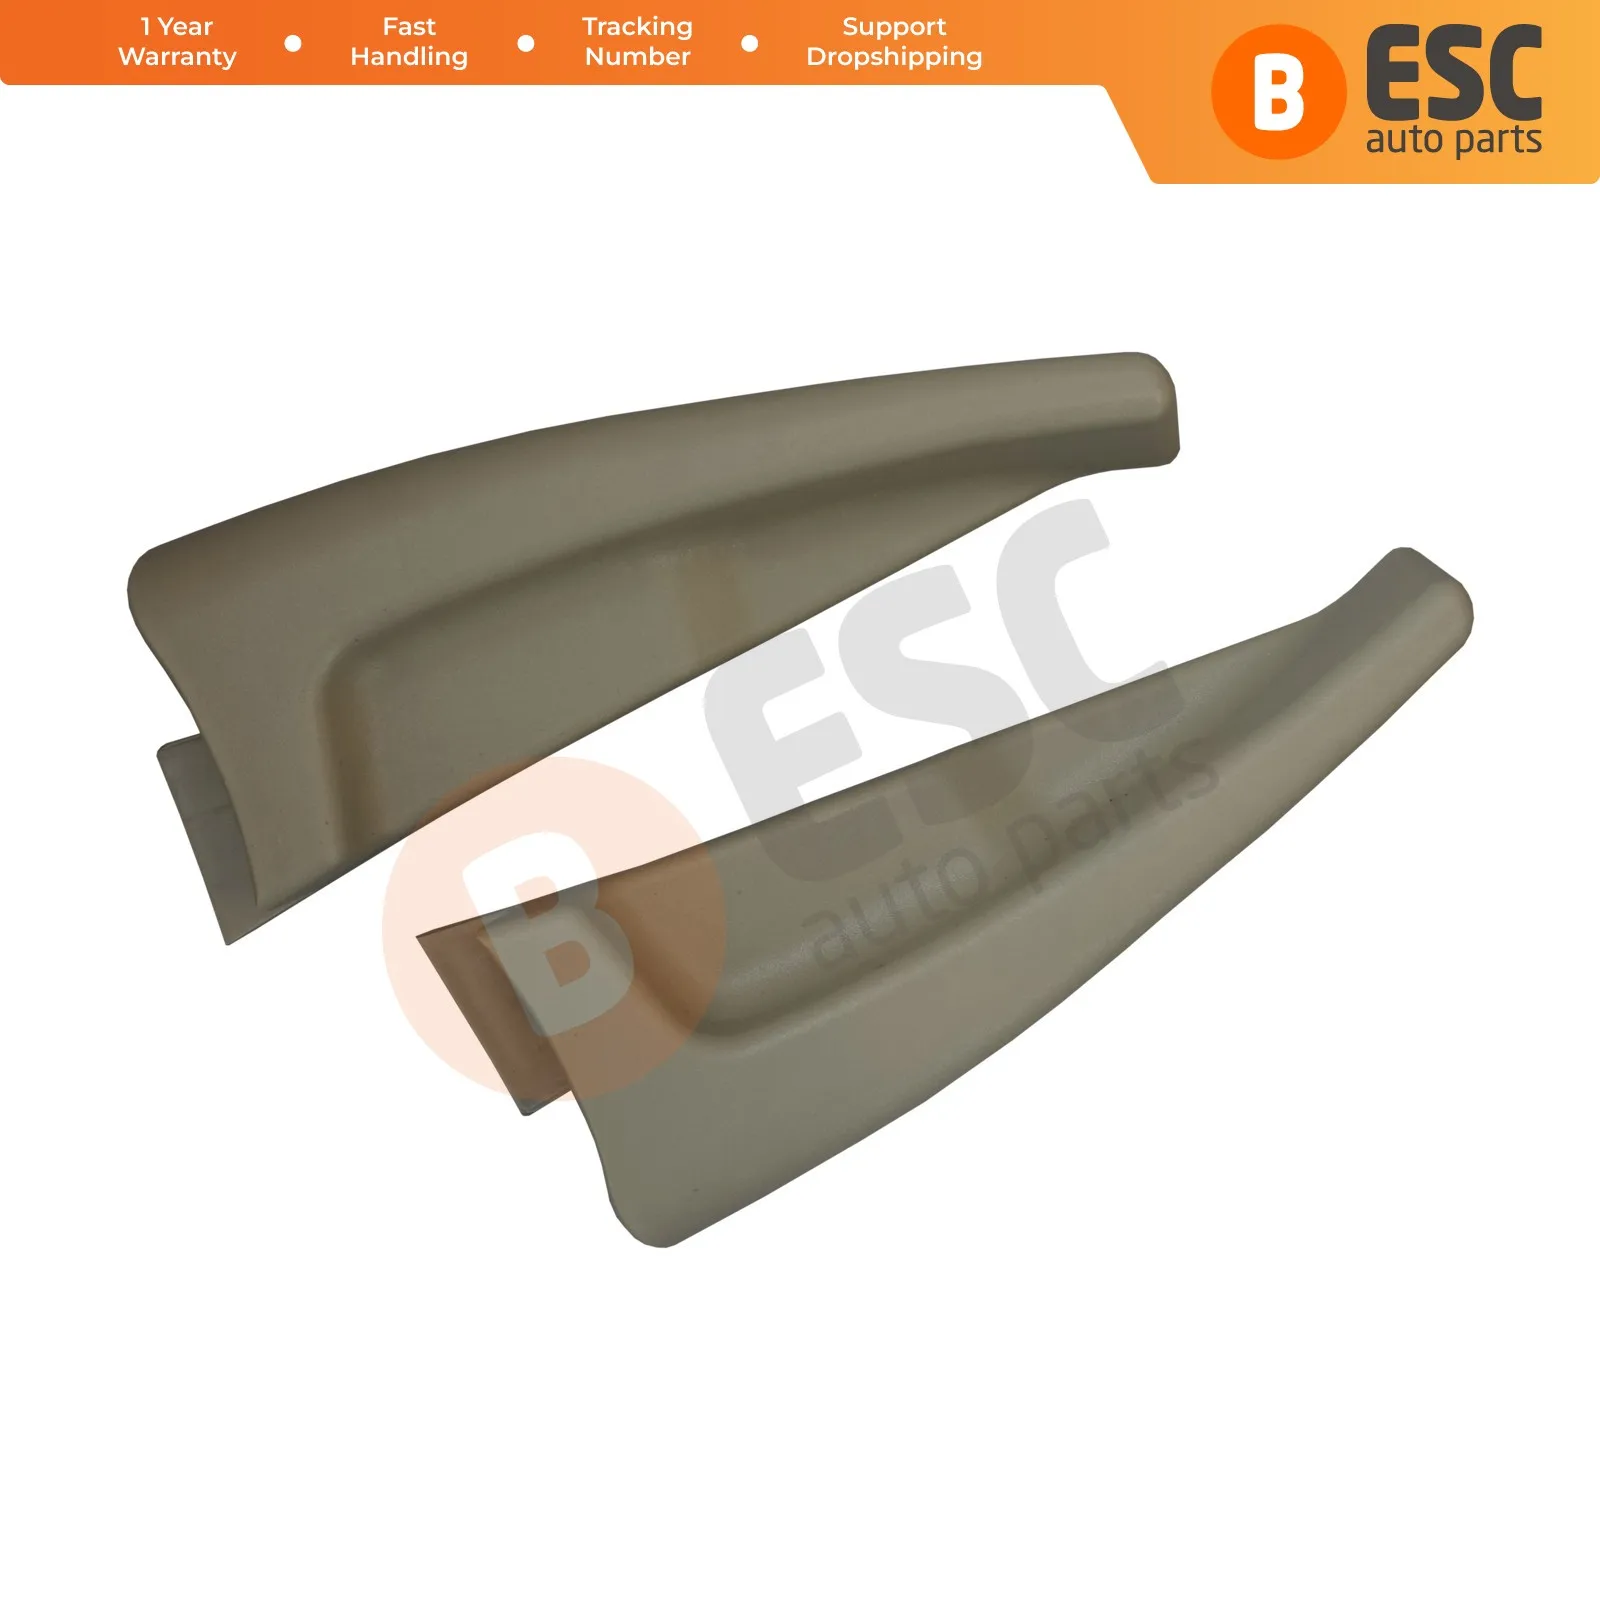 

ESC Auto Parts EDP639-1 2 Pieces Seat Handle Right and Left Beige Color for Renault Megane MK3 2008–2016, Fluence 2009-On